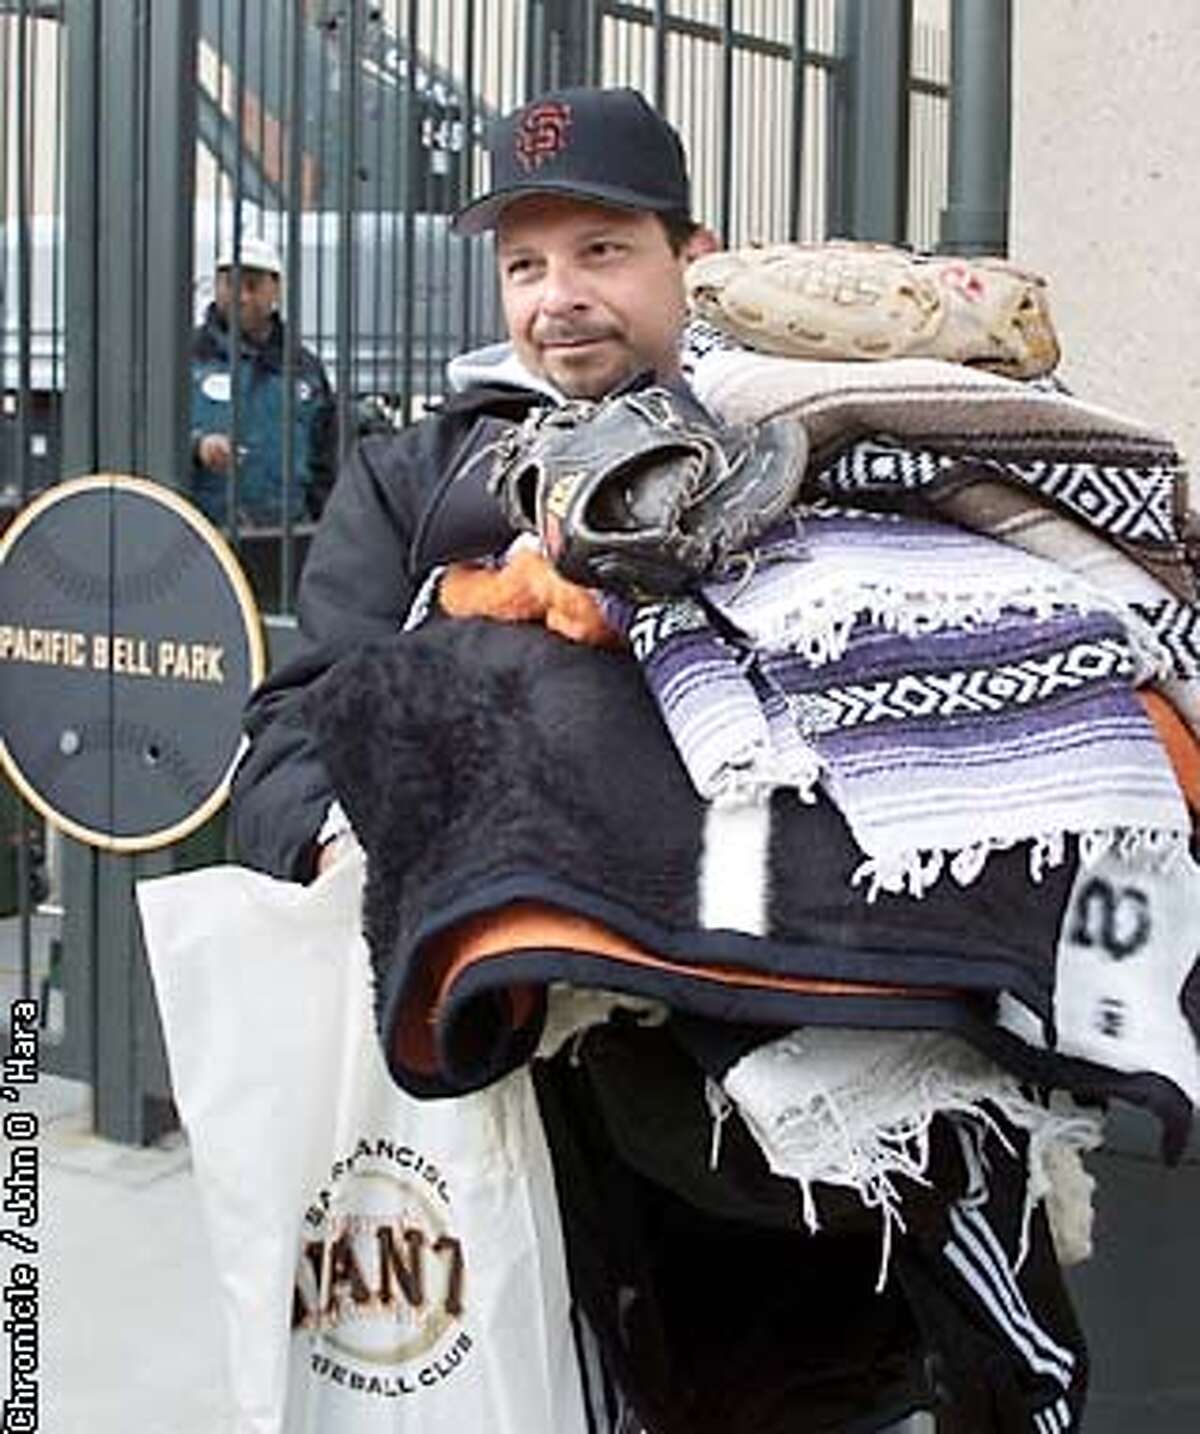 Pac Bel Park, San Francisco It's May and Tom Hernandez of Windsor knew enough to bring plenty of warm stuff to the windy city kfor his second ball game of the year photo/John O'Hara